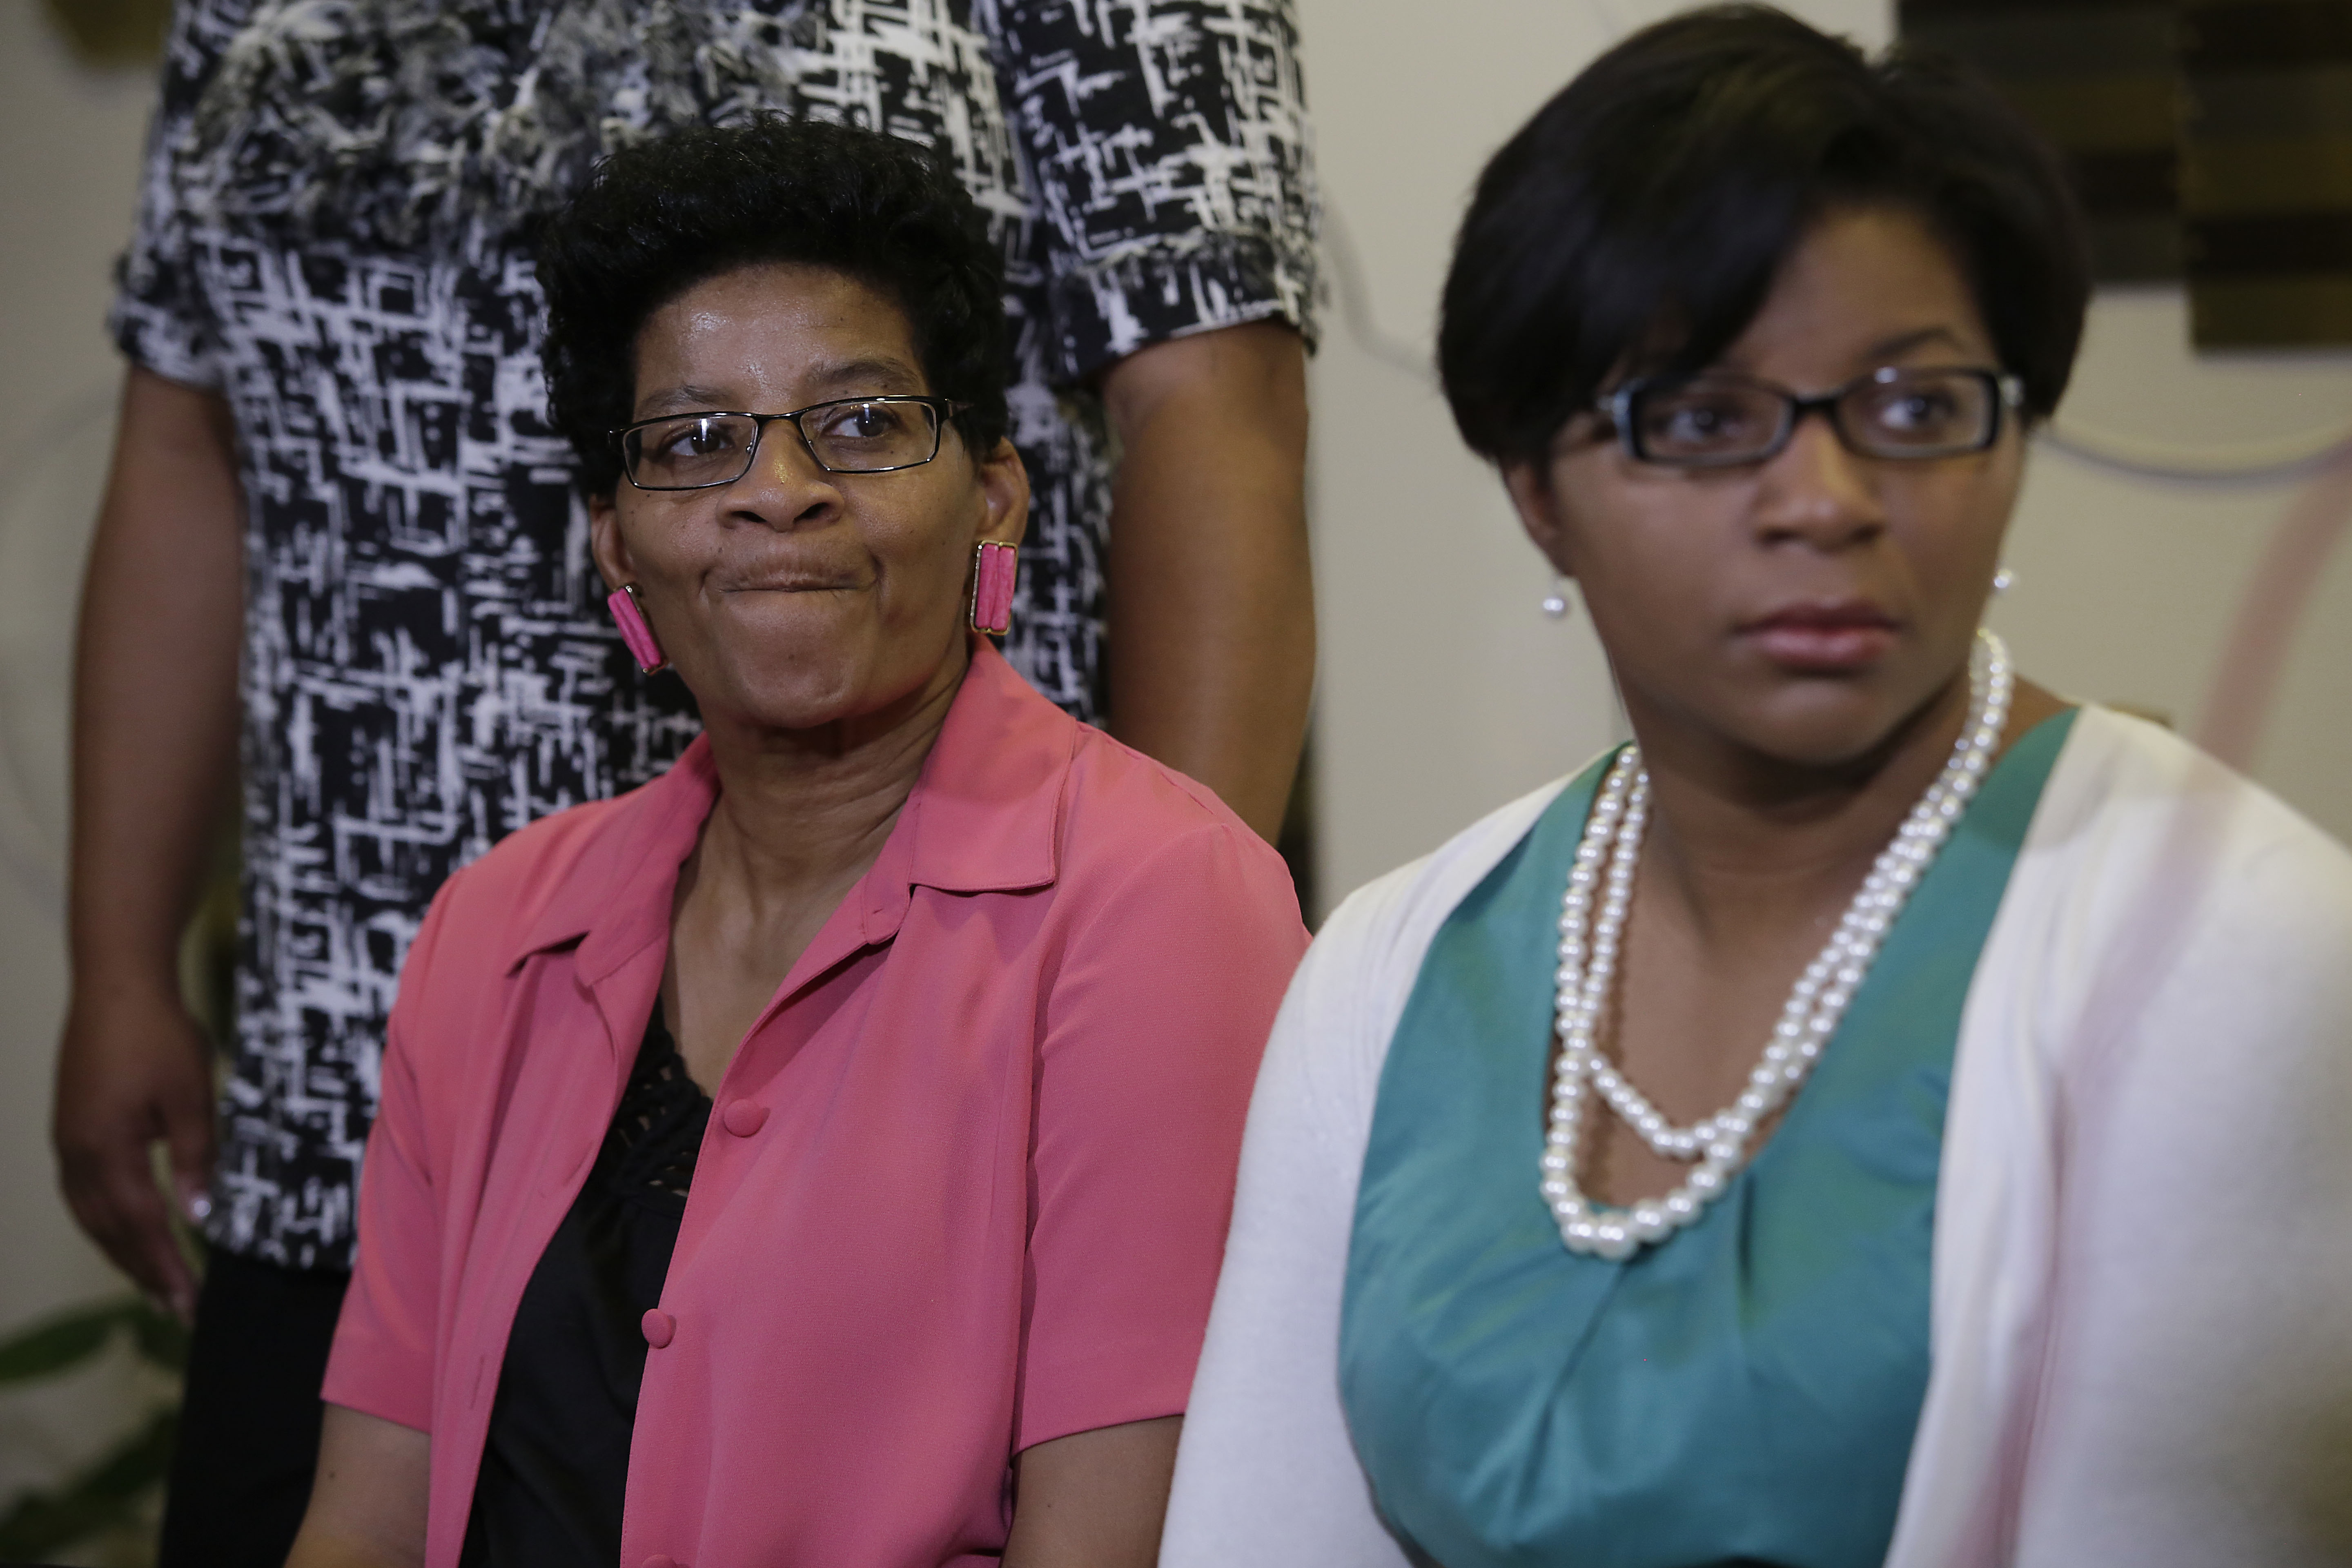 Sandra Bland's Family And Attorneys Speak To The Media In Illinois